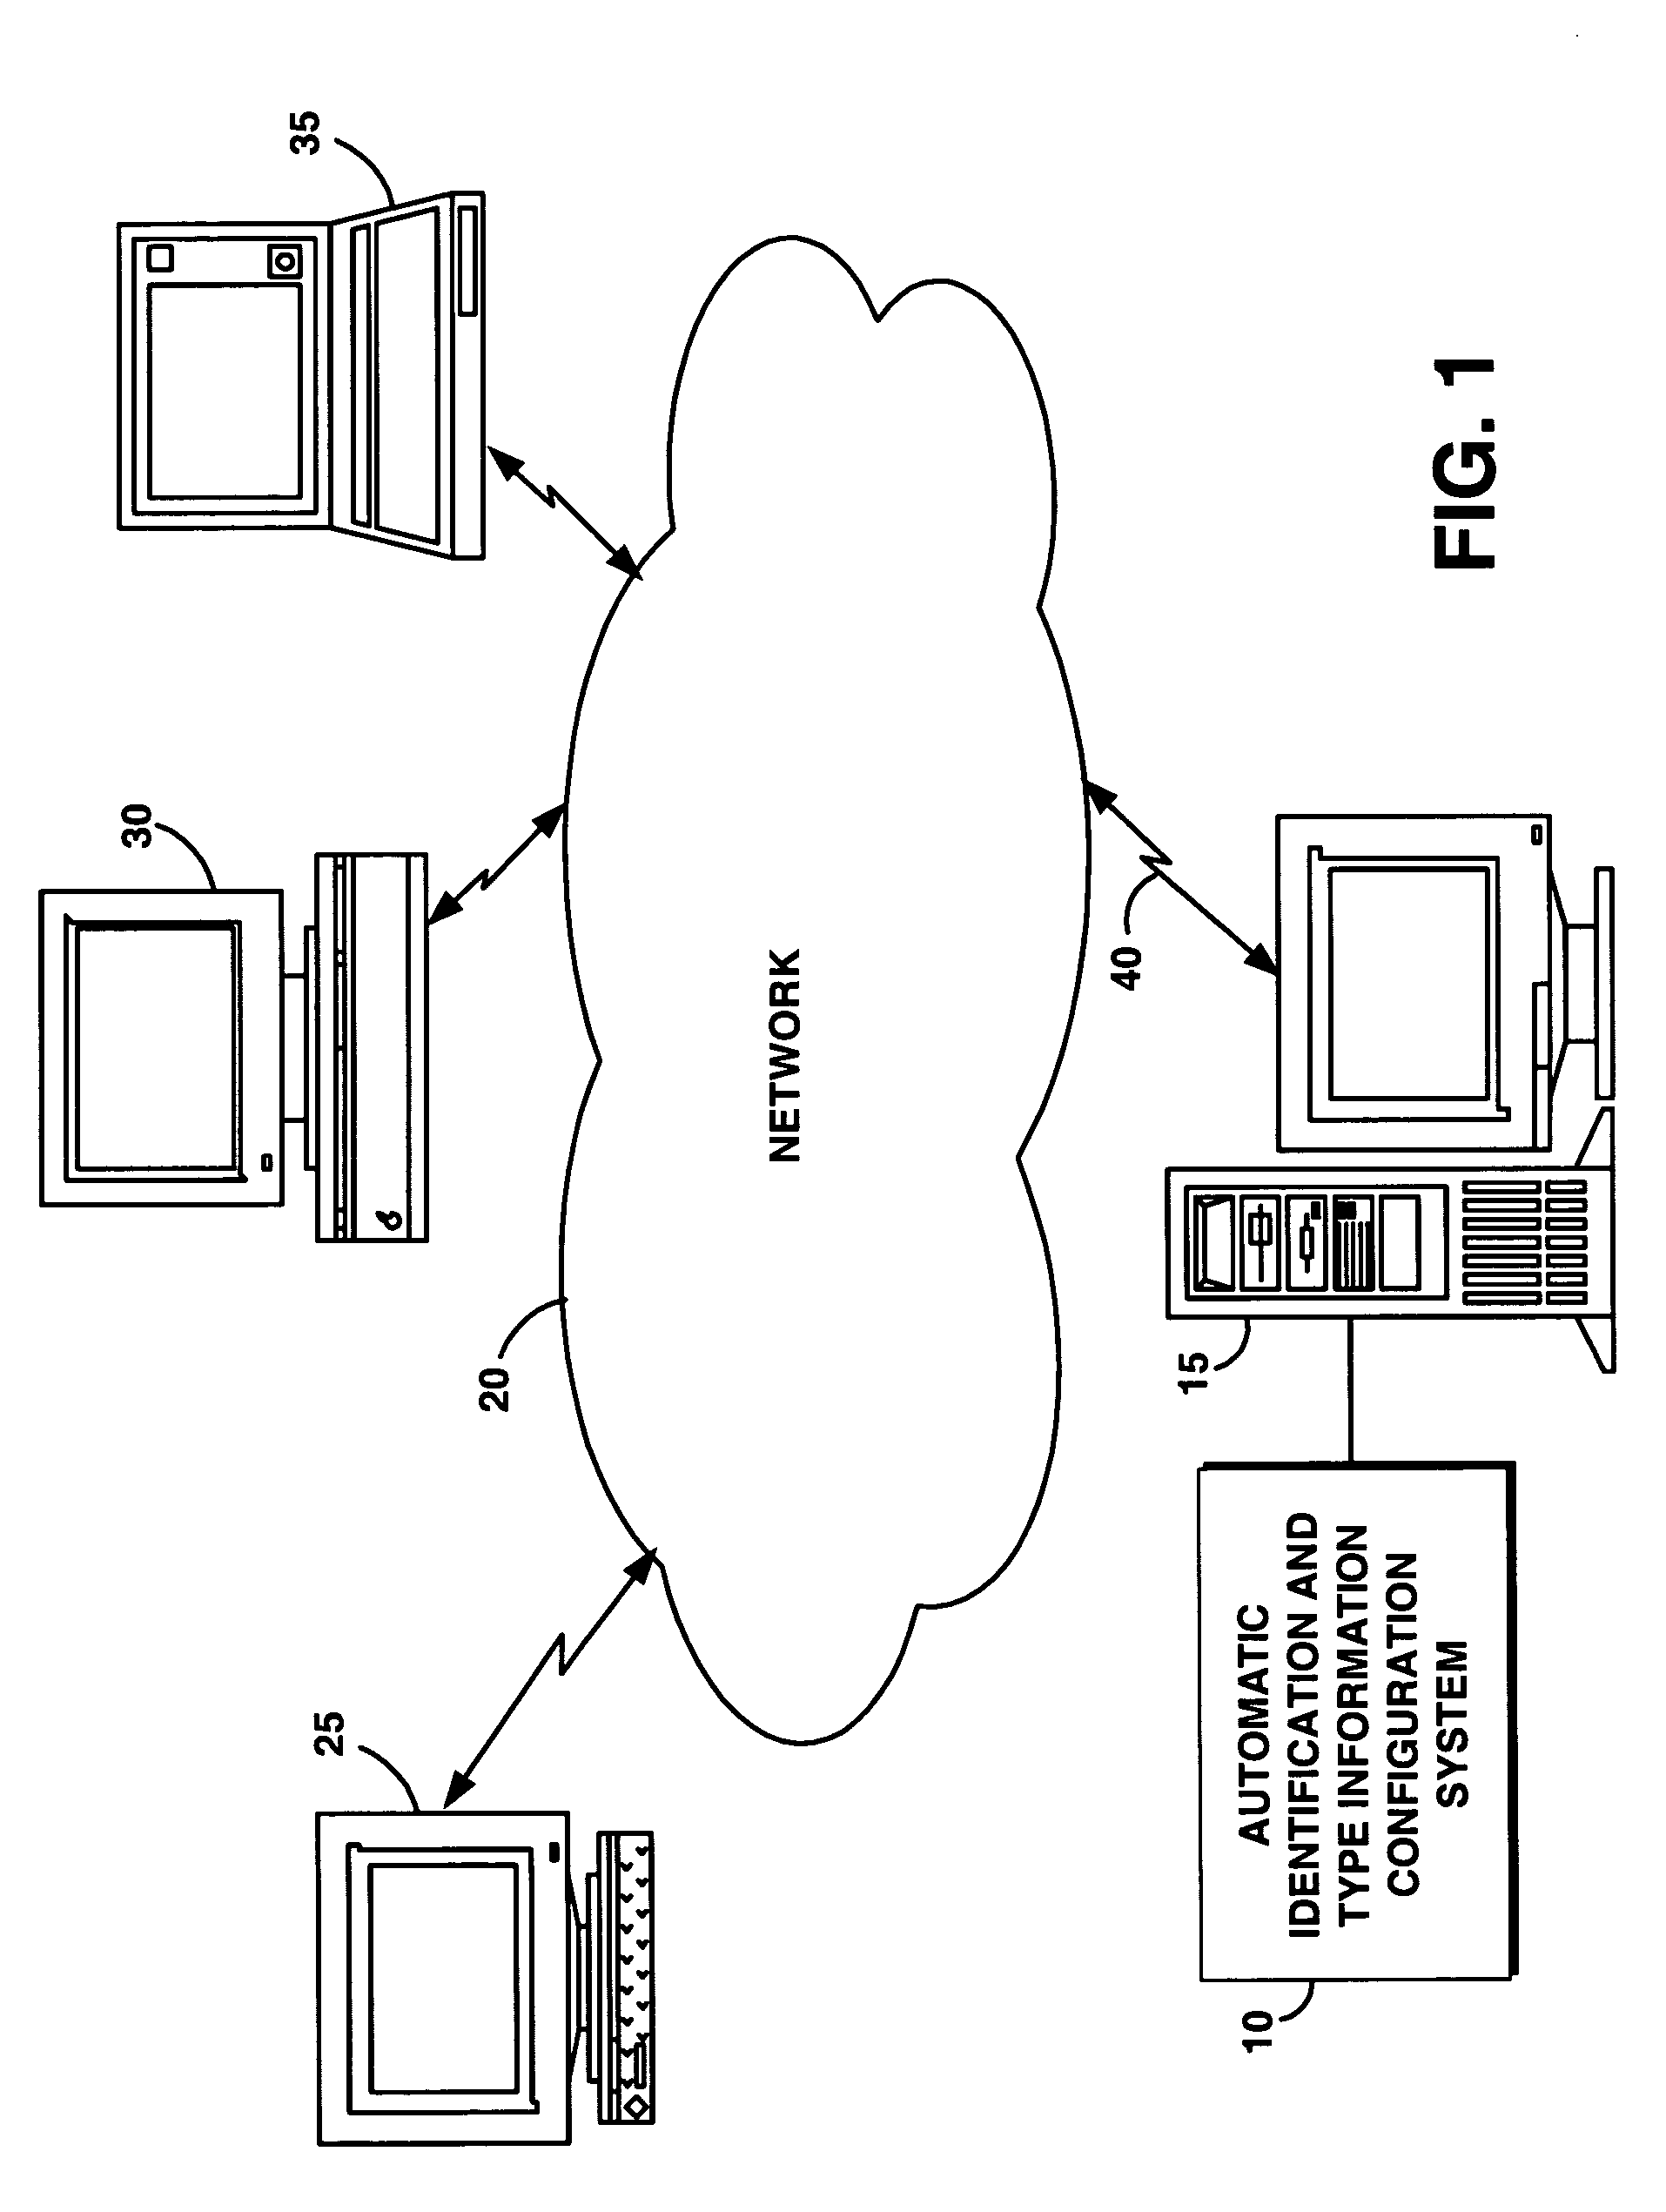 System and method for automating an identification mechanism and type information configuration process for a real-time data feed to a database